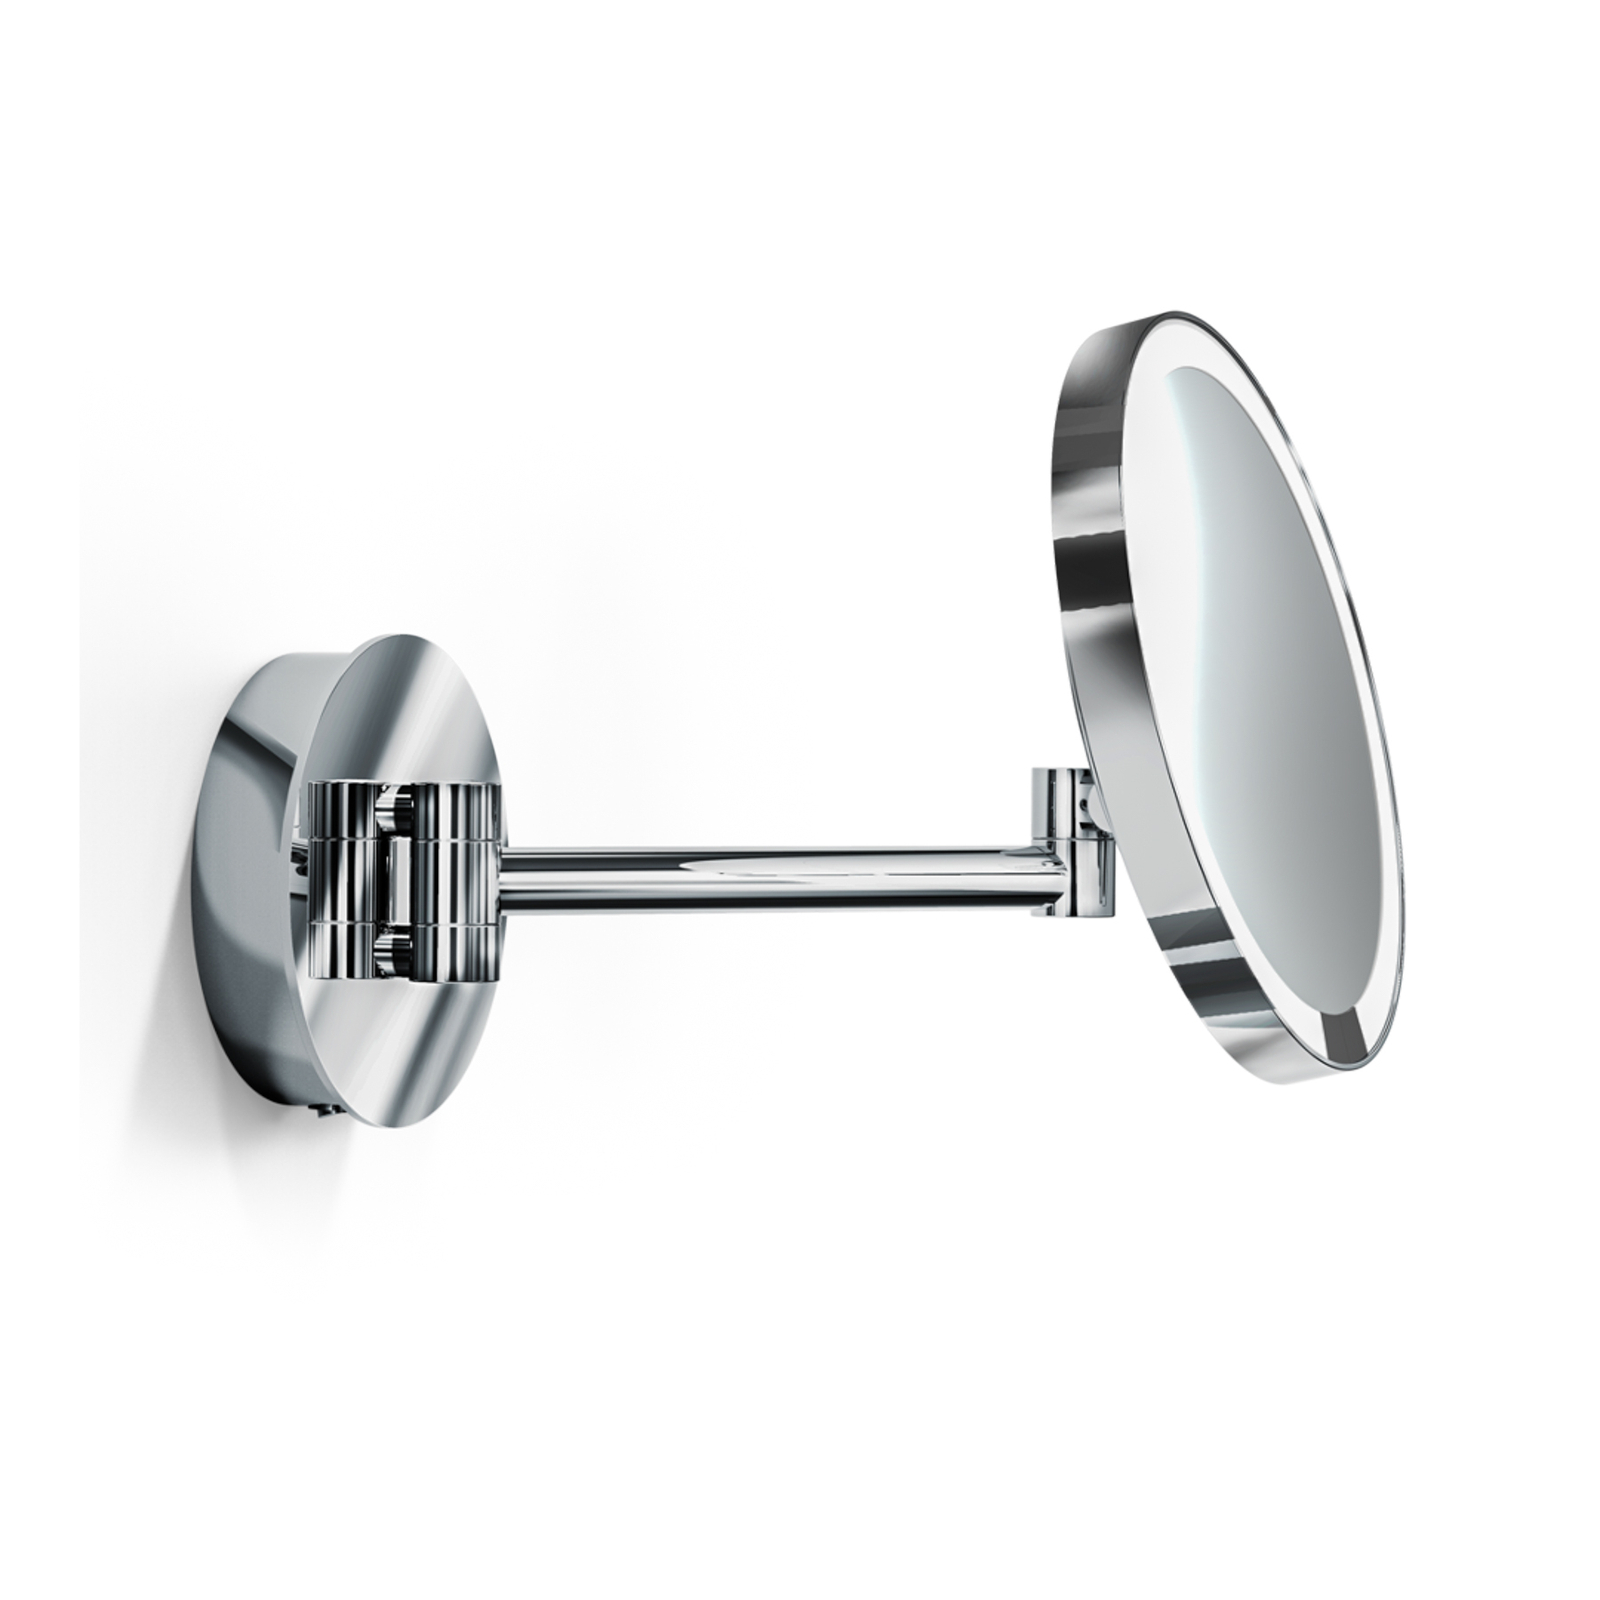 Decor Walther WD7X LED wall make-up mirror chrome